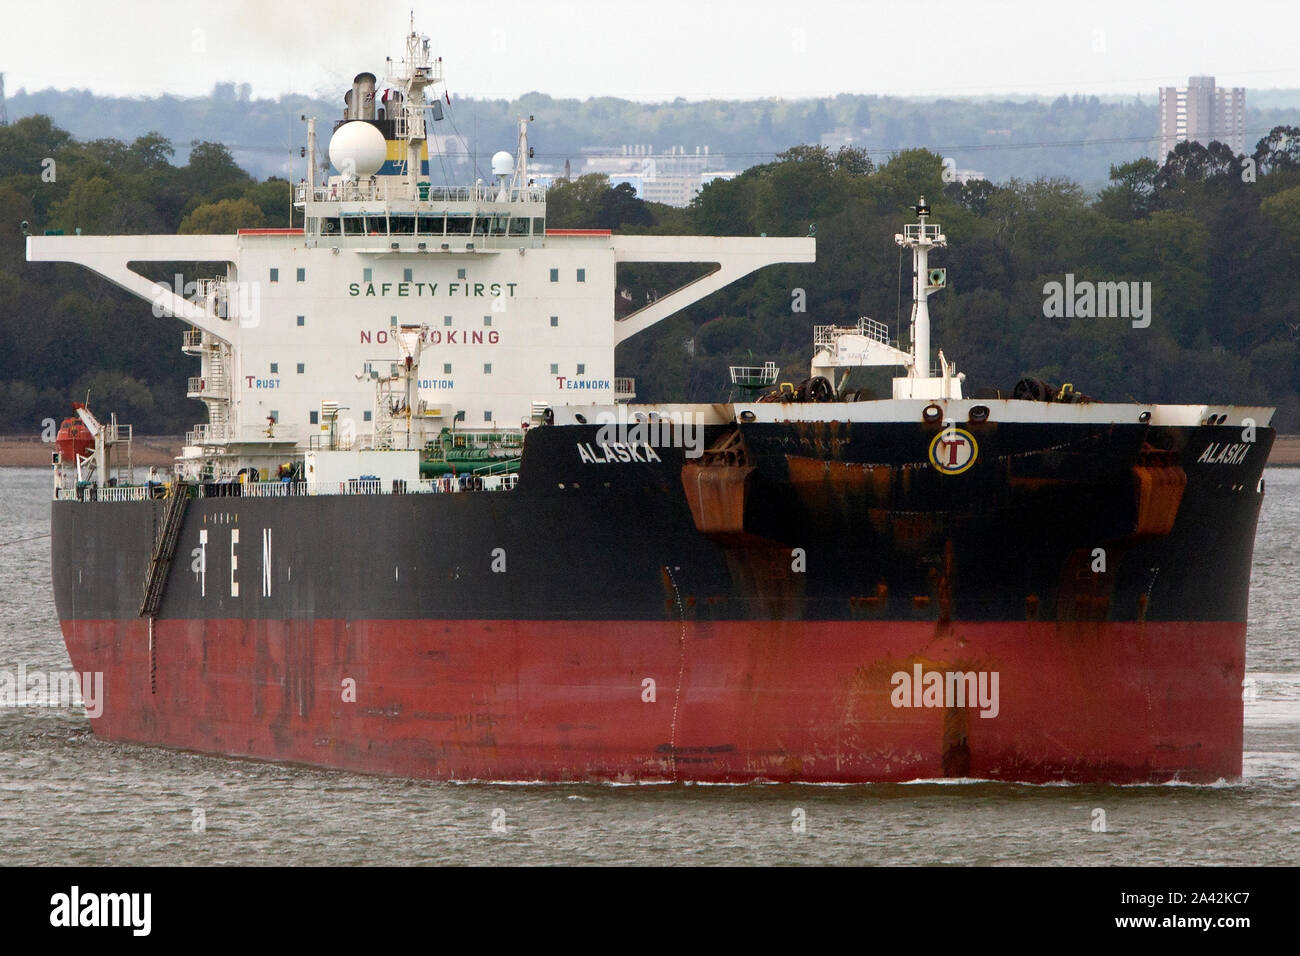 Global warming,climate,change,pollution,spill,slick,Oil Tanker, Alaska,TEN, company,no smoking,fire,risk,explosion,ship,shipping,The Solent,Fawley Stock Photo